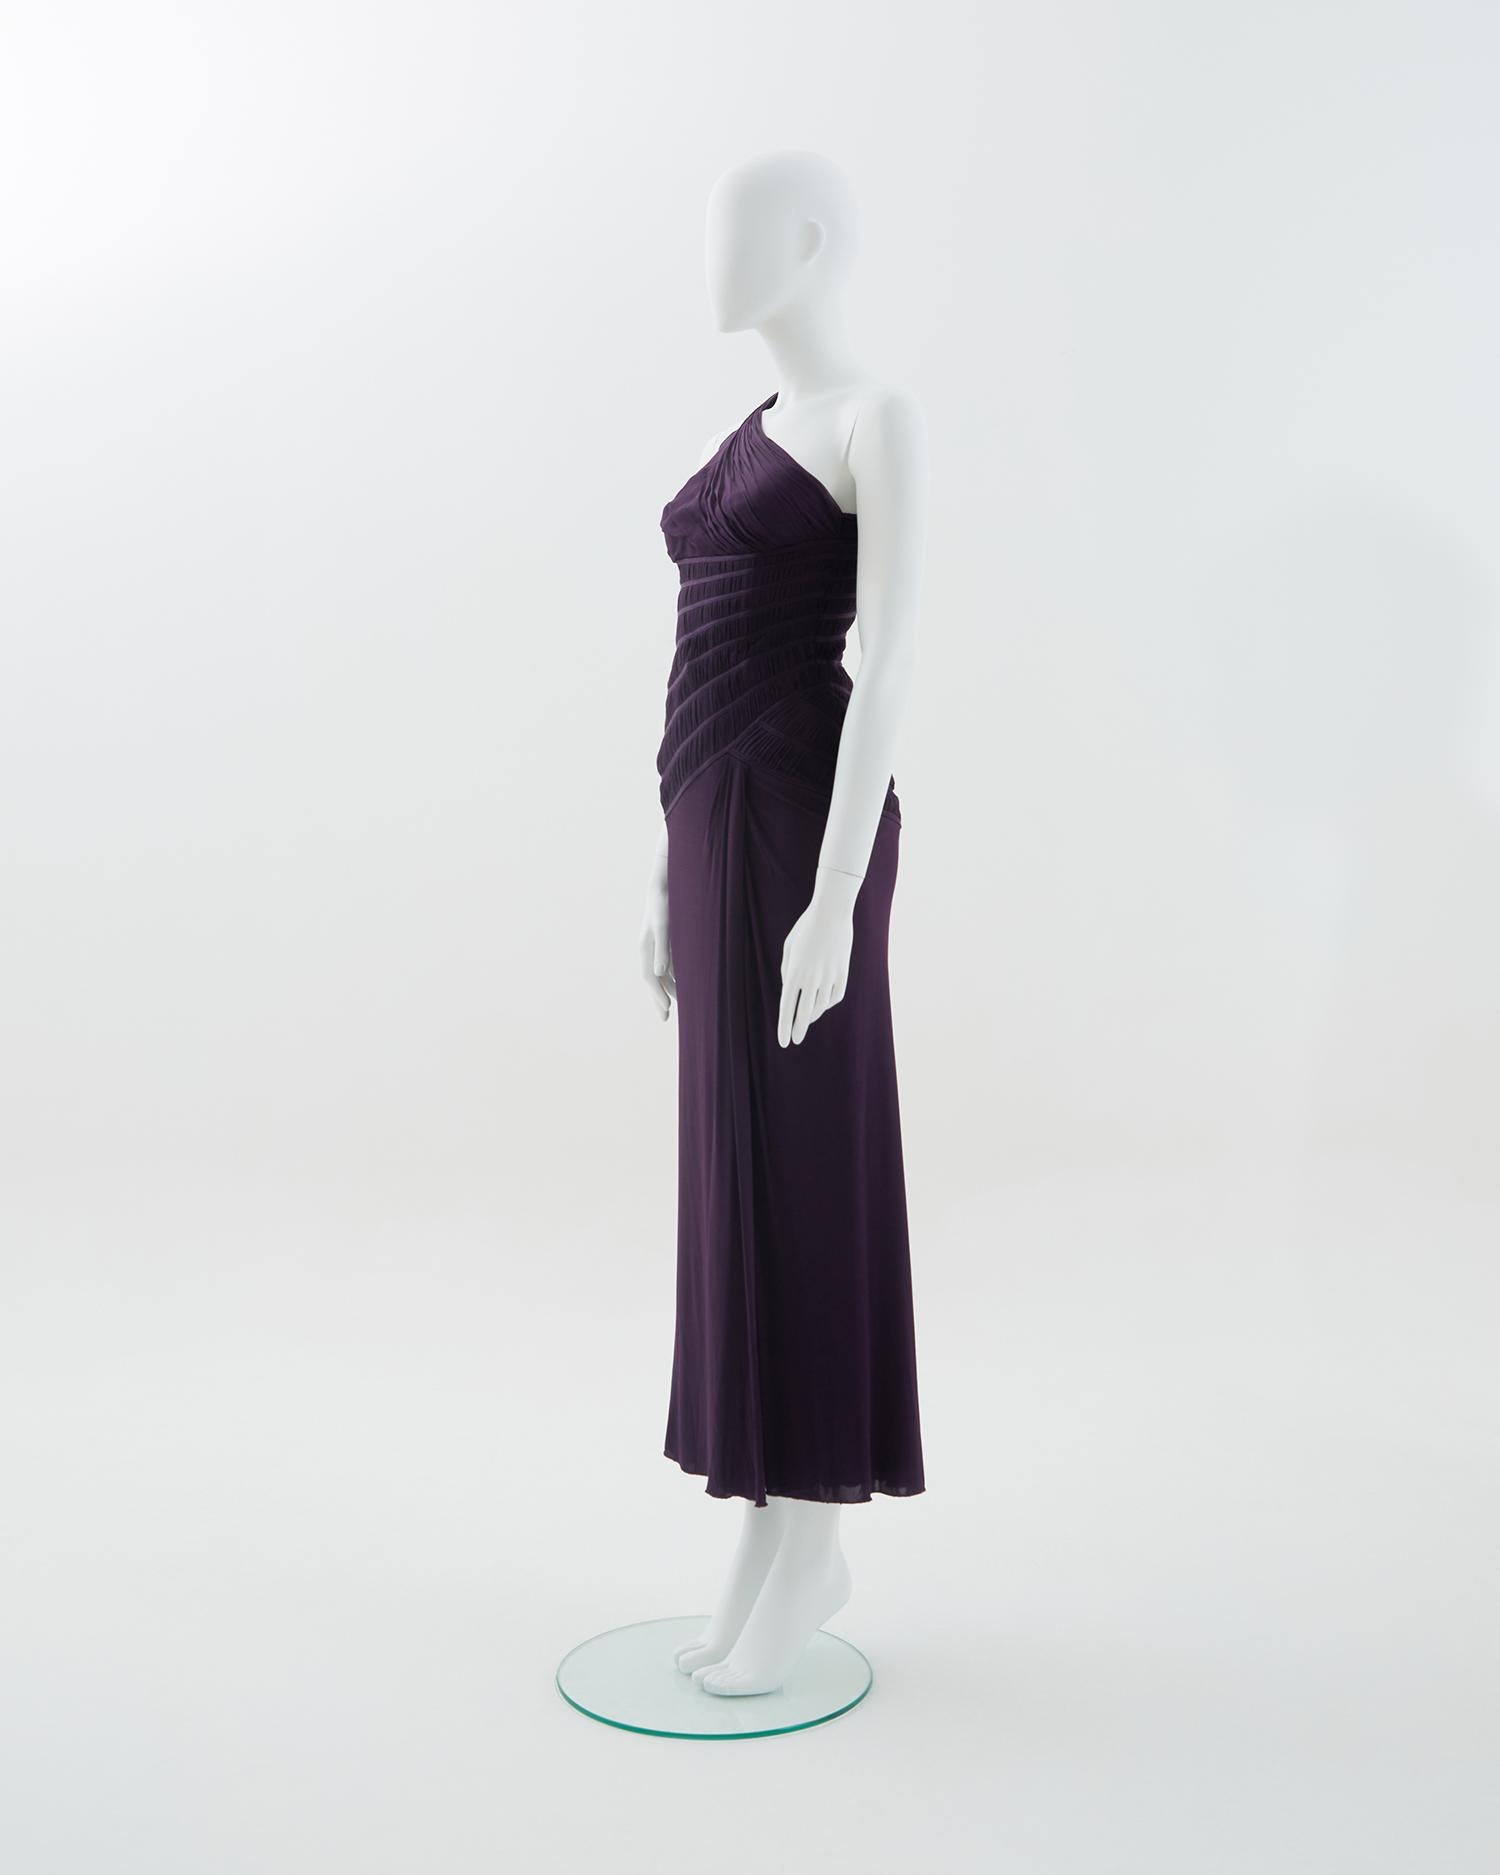 - Designed by Donatella Versace
- Sold by Skof.Archive
- Pre-Fall 2008
- Purple stretch Versace gown 
- Slinky one shoulder 
- High-slit dress debuted on the season's runway as look 32
- Drape details at the shoulder straps and hips 
- Made in Italy